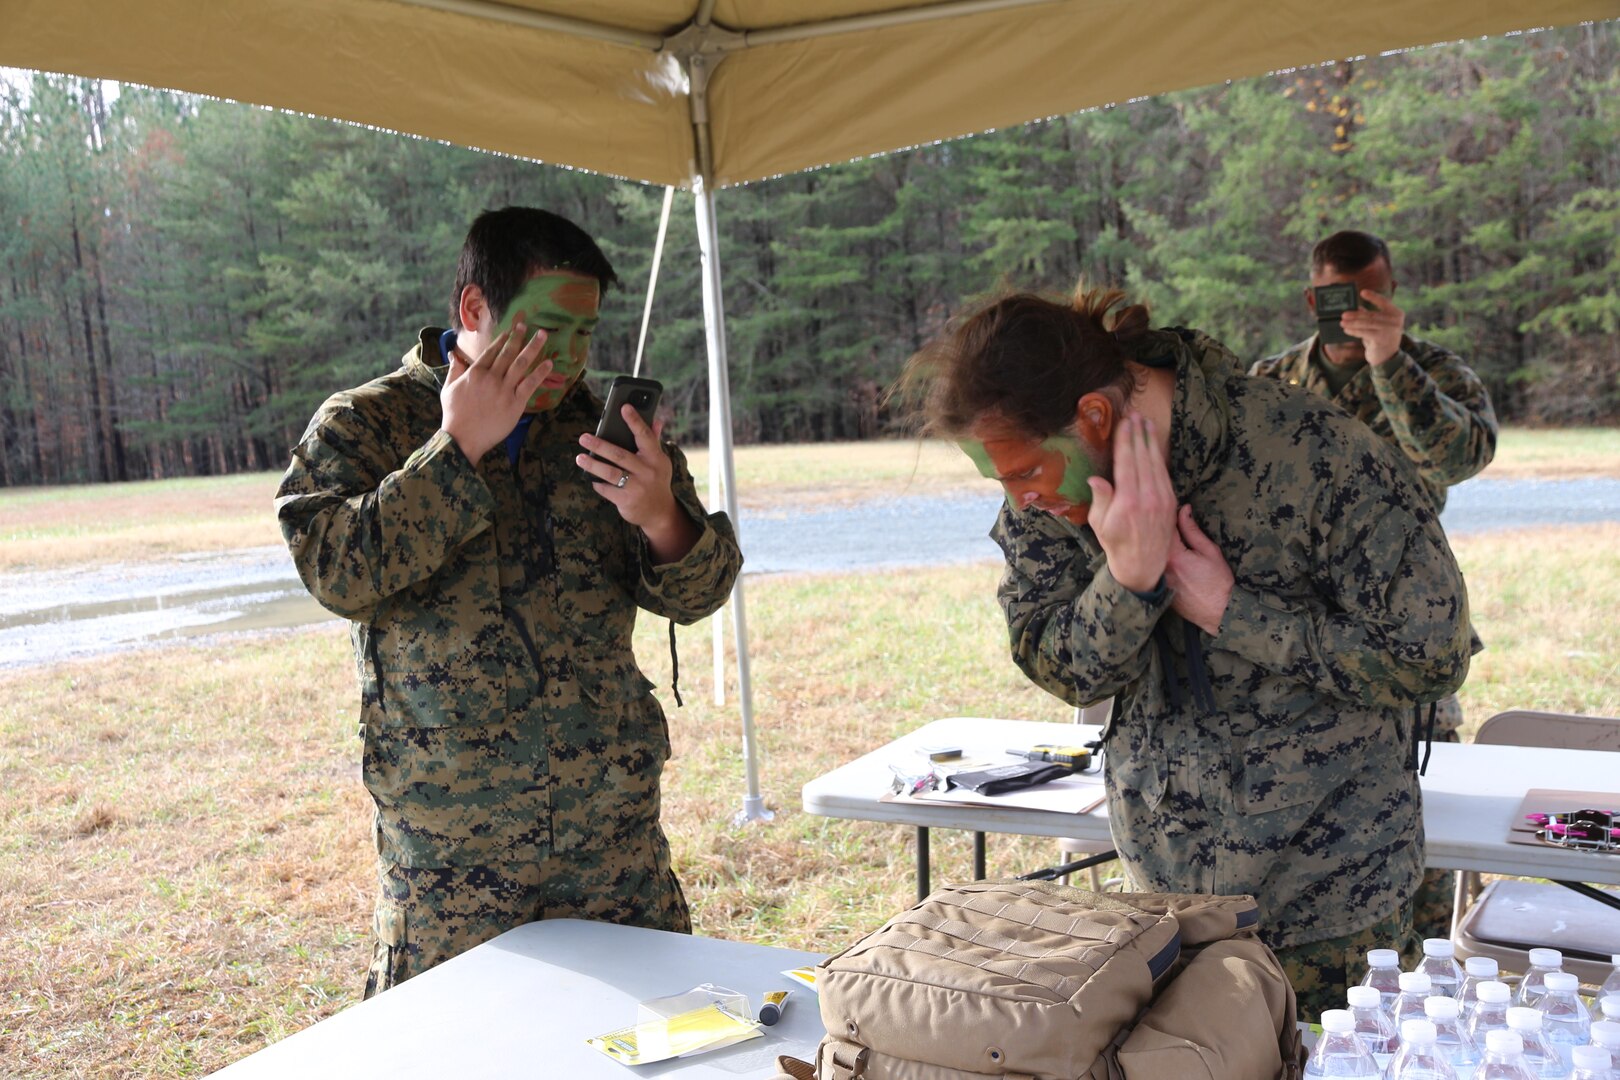 Evan Luo and Justin Miller, engineers from Marine Corps Systems Command’s Marine Expeditionary Rifle Squad team, apply camouflage paint as part of a target detection evaluation in December aboard Marine Corps Base Quantico, Va. MCSC engineers conducted target detection speed trials with combat instructors from the School of Infantry–East to evaluate how fast the instructors could detect the decoys, who were outfitted in varying camouflage gear. The evaluation was part of the Infantry Equipping Challenge, an ongoing effort at Marine Corps Systems Command to leverage new and emerging technologies from industry to enhance the capability of Infantry Marines. (U.S. Marine Corps photo by Ashley Calingo)